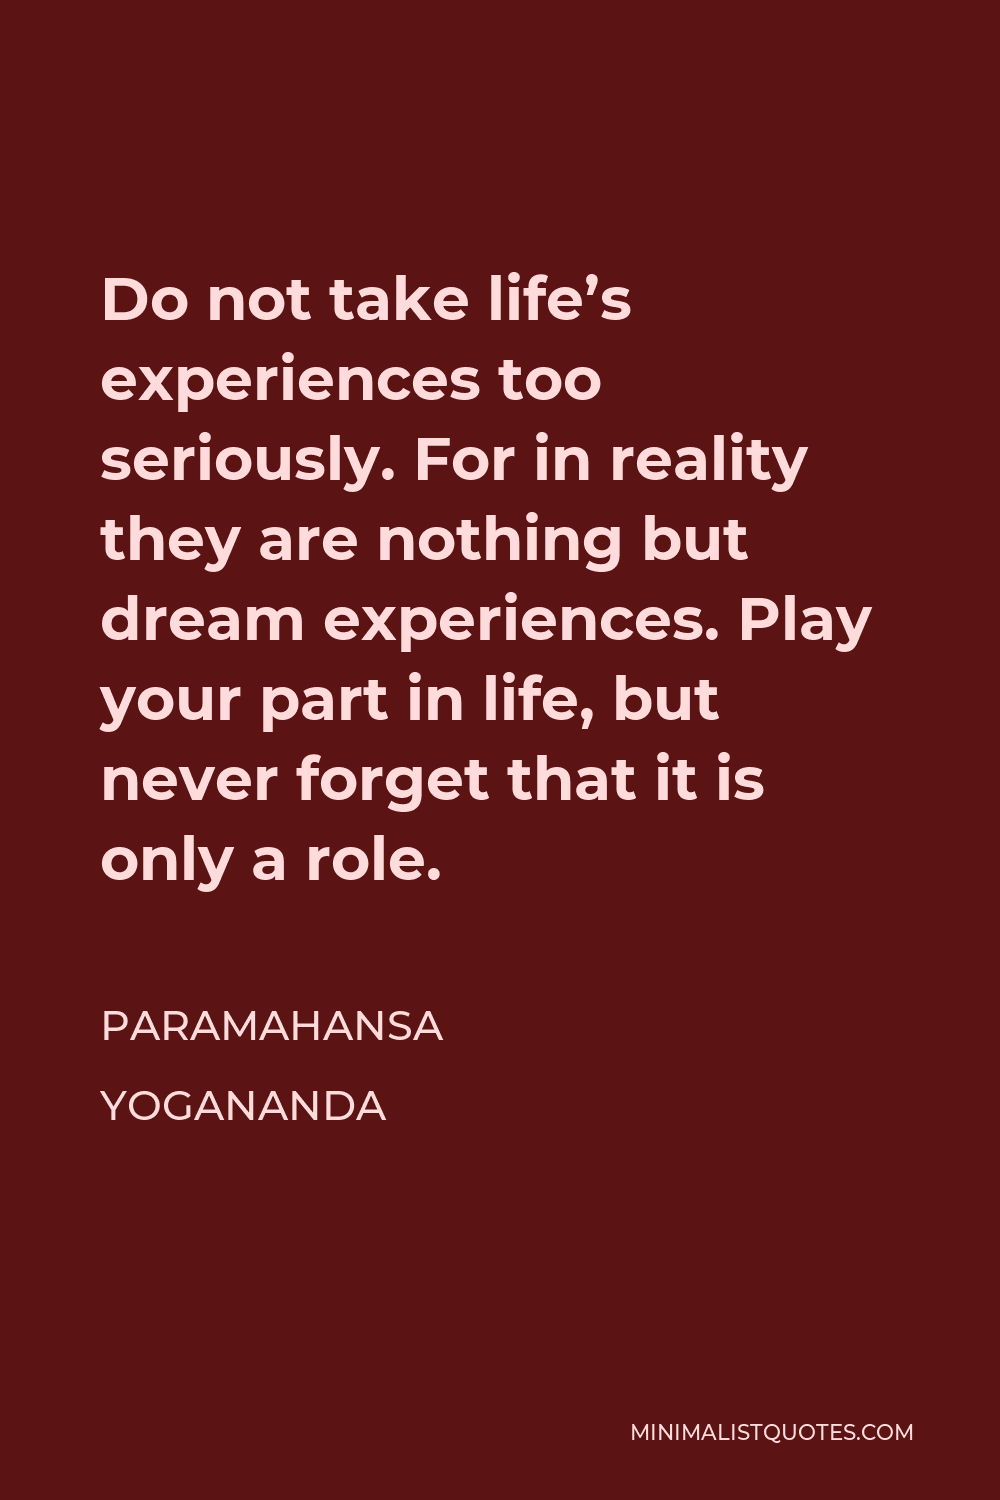 Paramahansa Yogananda Quote - Do not take life’s experiences too seriously. For in reality they are nothing but dream experiences. Play your part in life, but never forget that it is only a role.